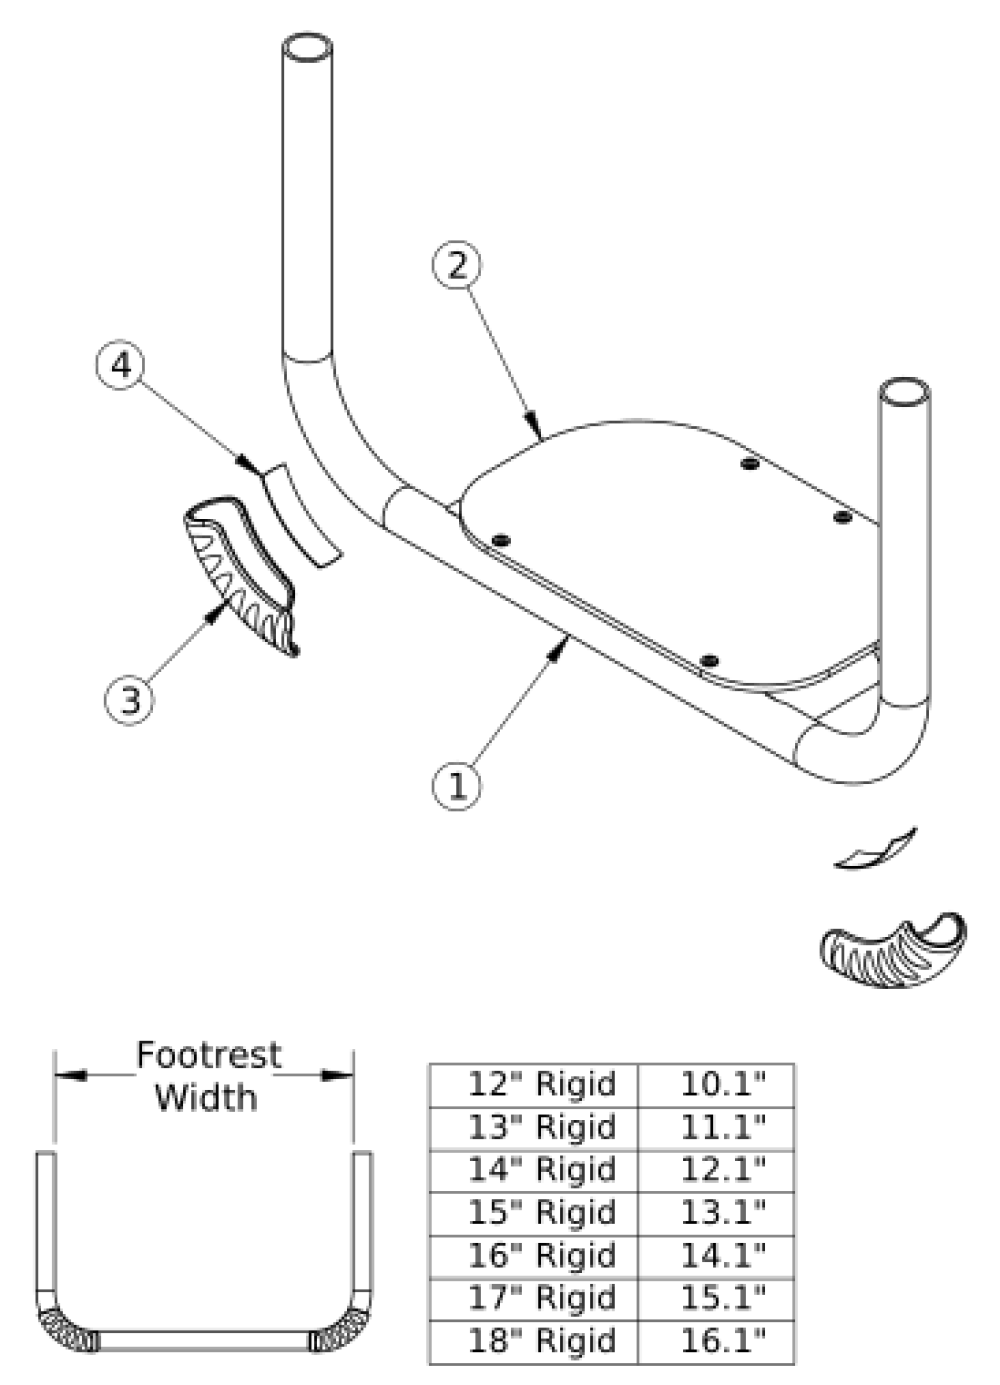 Rogue2 Footrest - Tubular With Abs Cover parts diagram